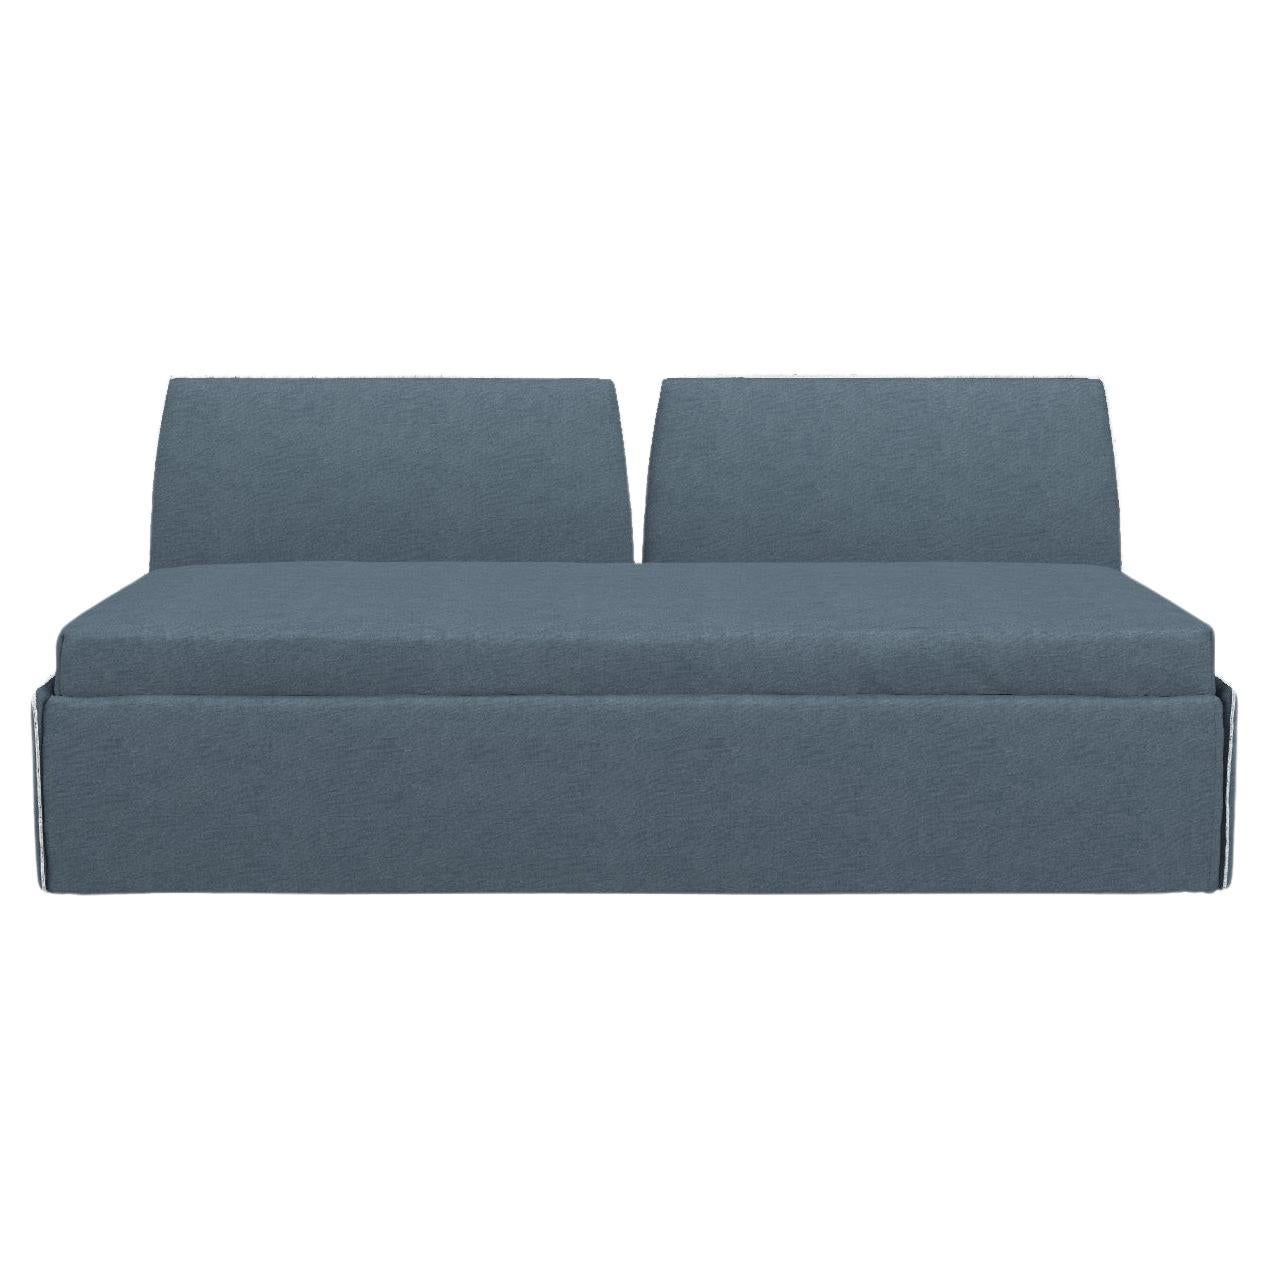 Gervasoni Open 5 Large Modular Bed Sofa in Munch Upholstery by Paola Navone